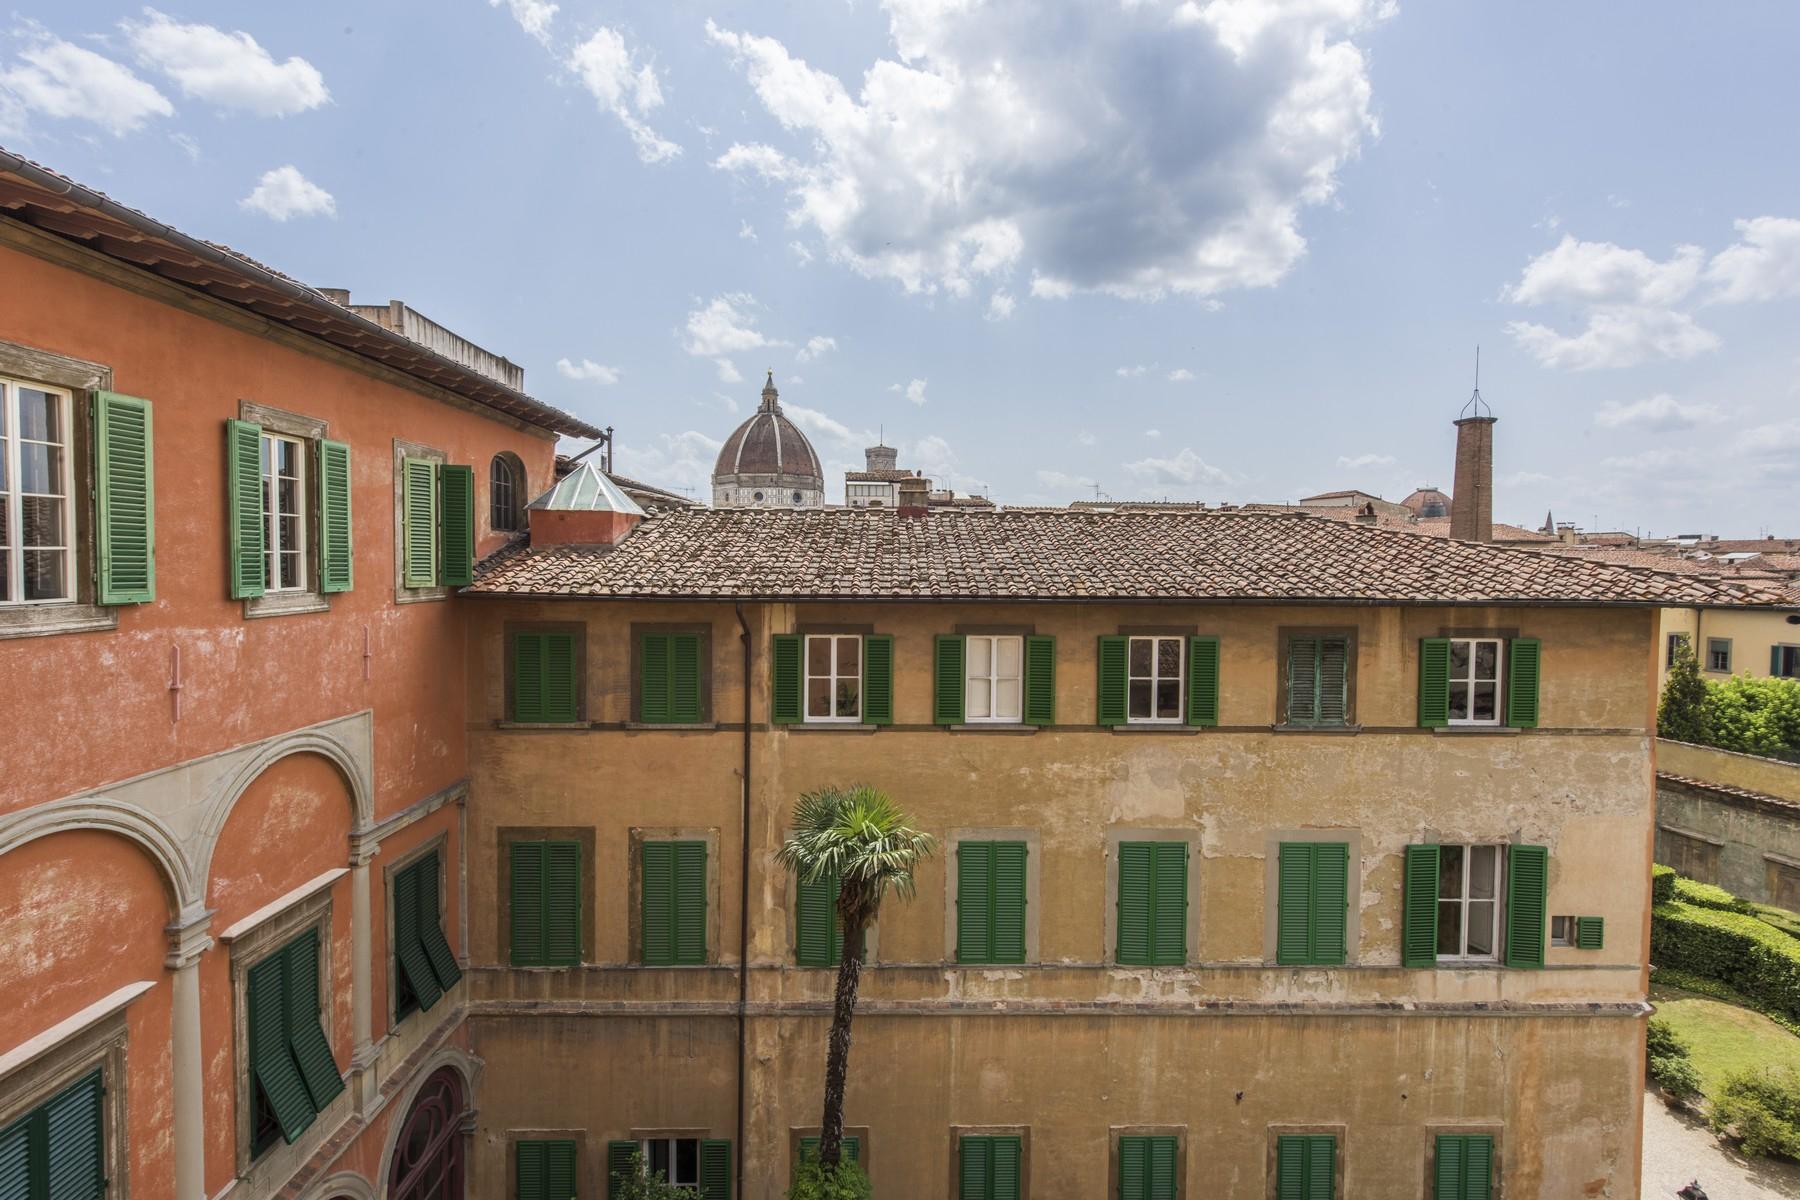 Magnificent 520sqm penthouse in a historic Florentine palazzo. - 13